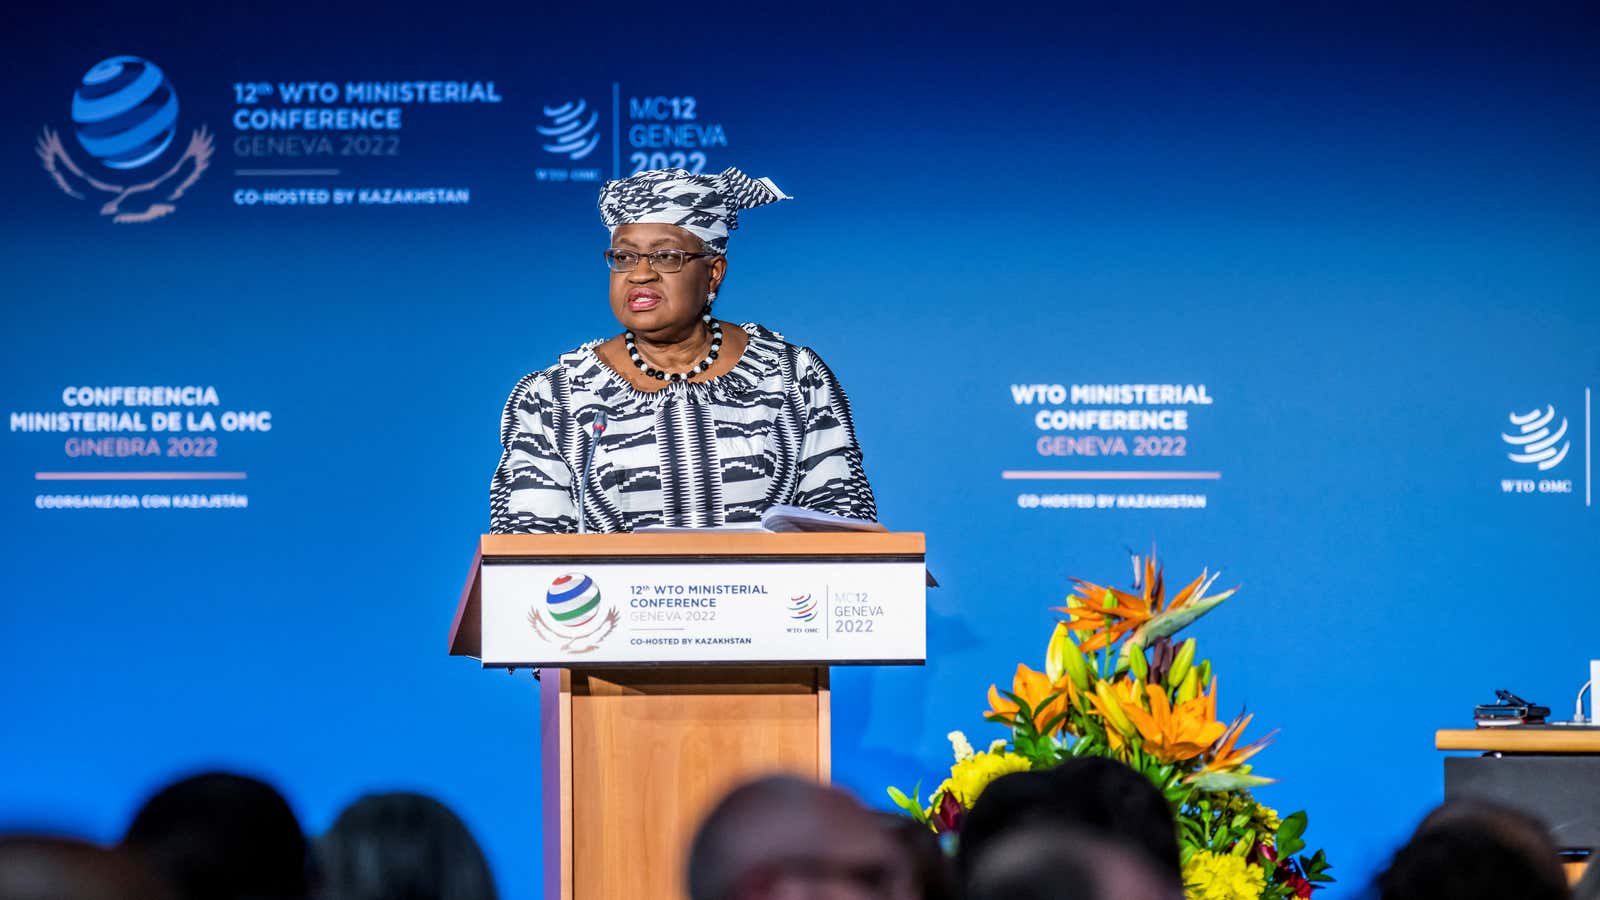 Director-General of the World Trade Organisation (WTO) Ngozi Okonjo-Iweala speaks at the opening ceremony of the 12th Ministerial Conference.